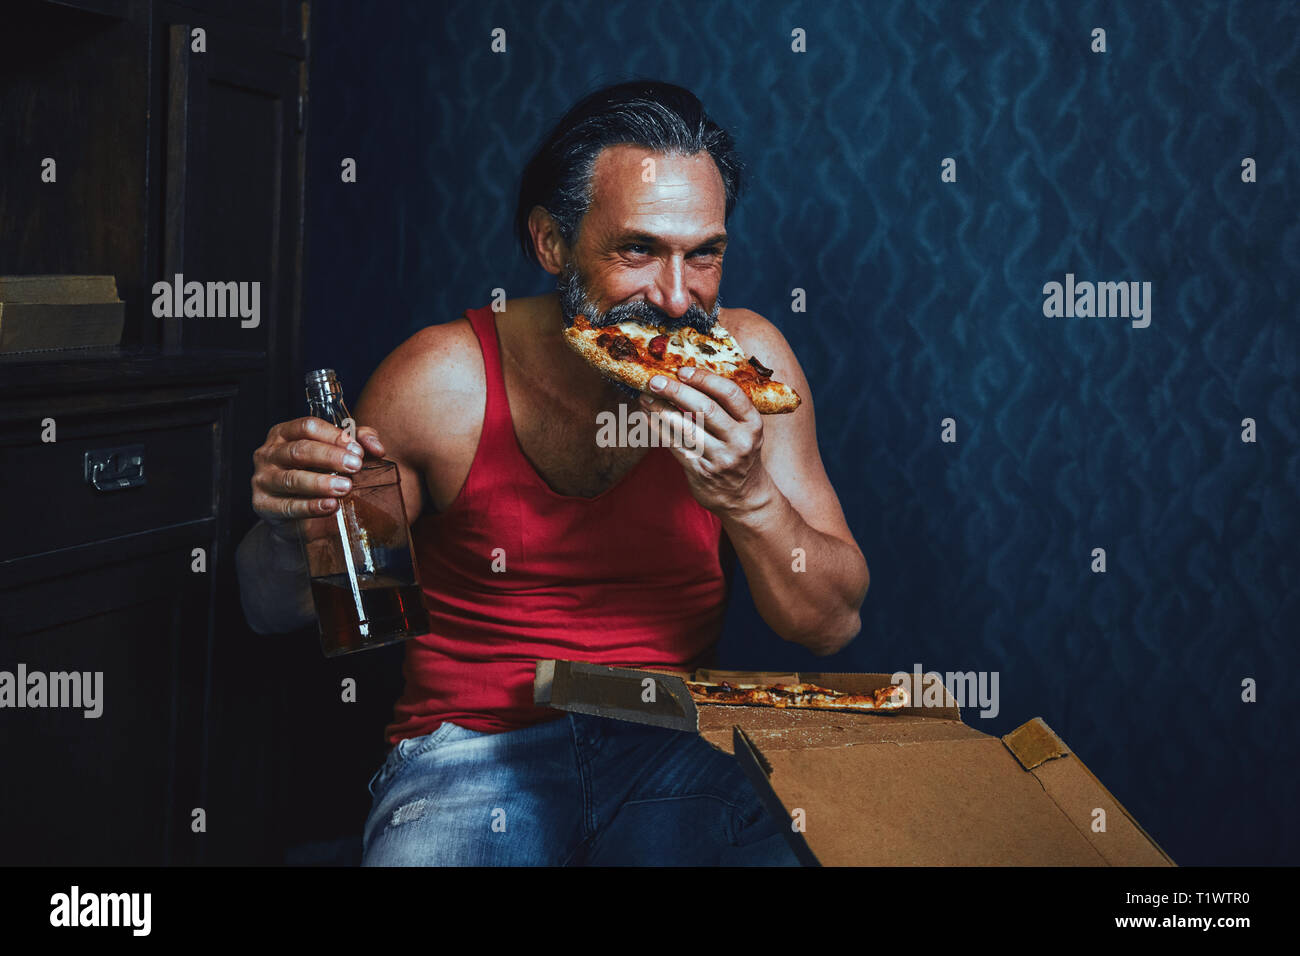 Brutal Bearded Man at Home Eating Pizza and Drinking Alcohol. Stock Photo